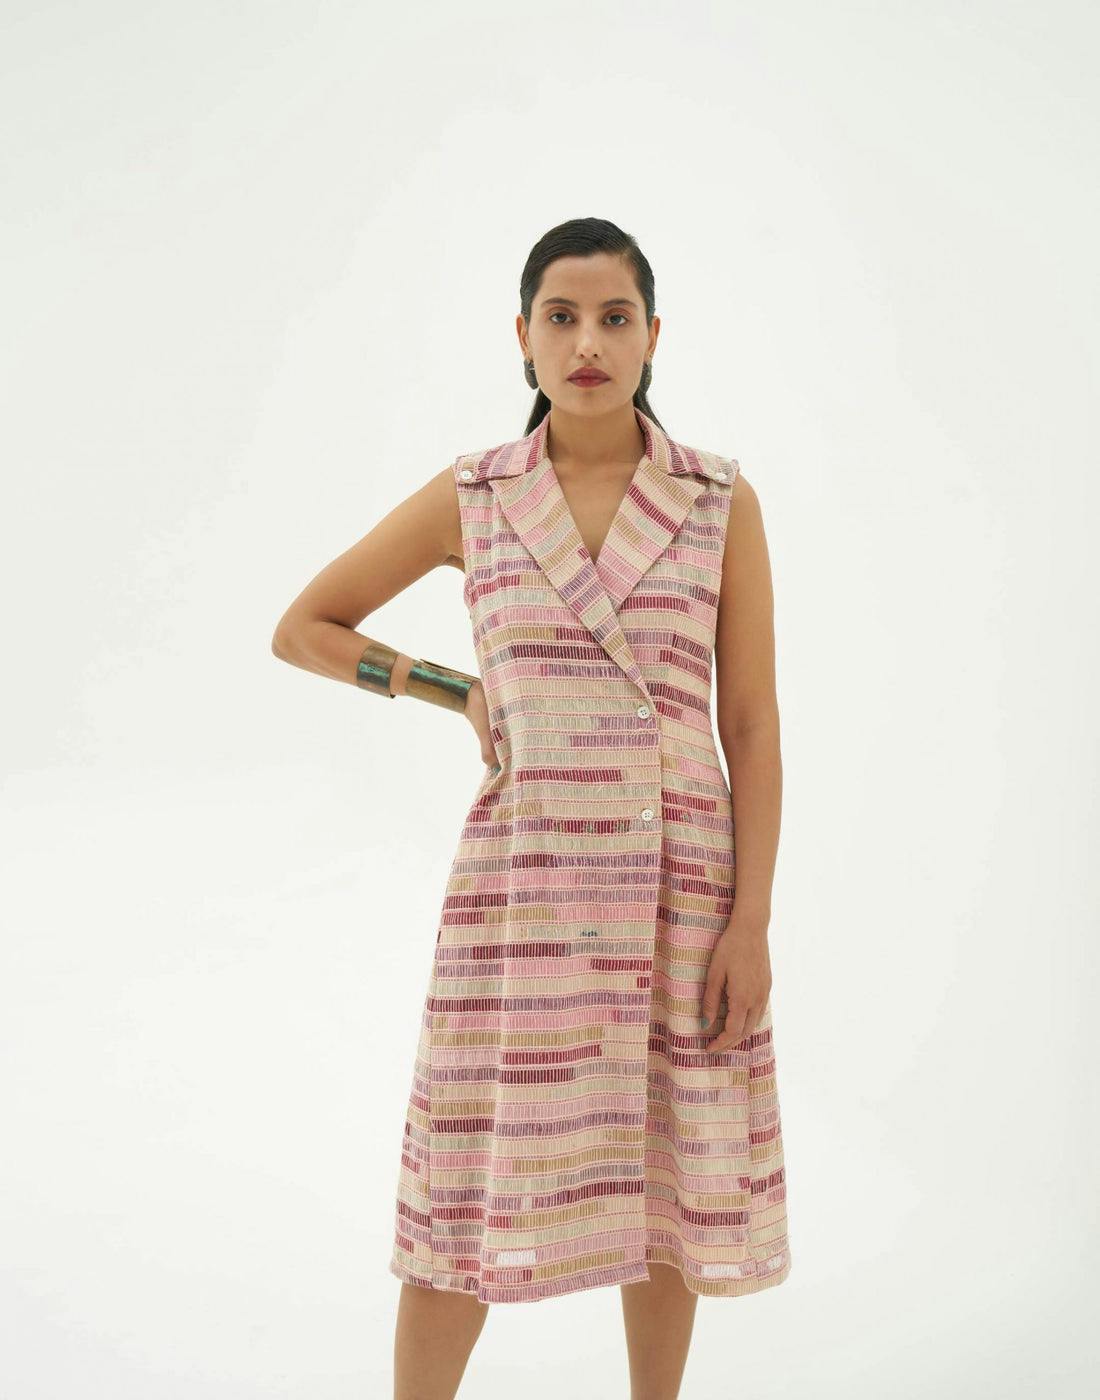 Up-cycled extended collar dress, a product by Corpora Studio